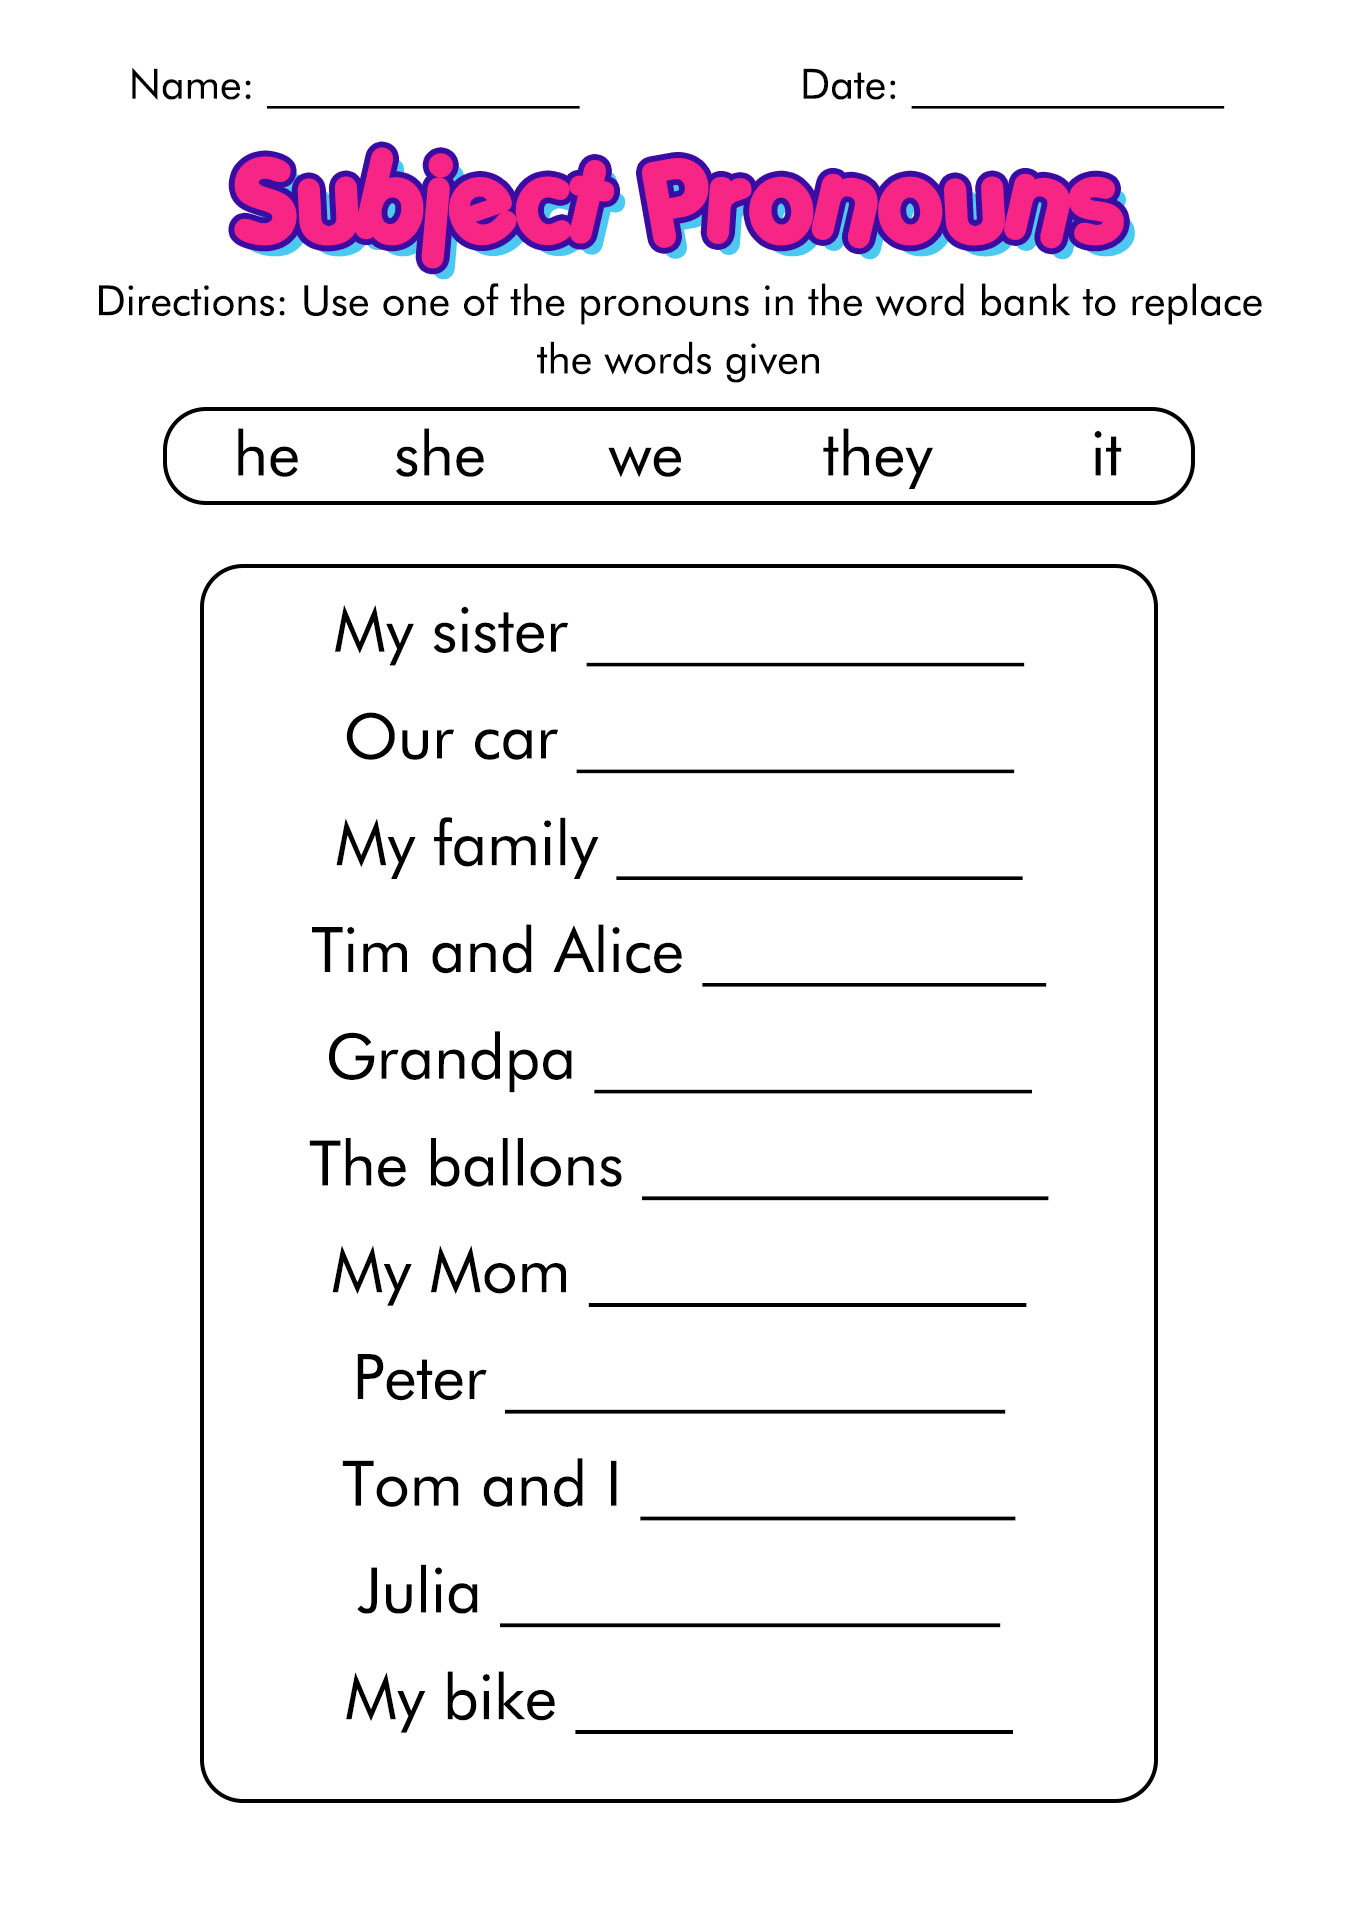 15 Best Images Of Pronoun Contractions Worksheets Contraction Worksheets Grade 1 Personal